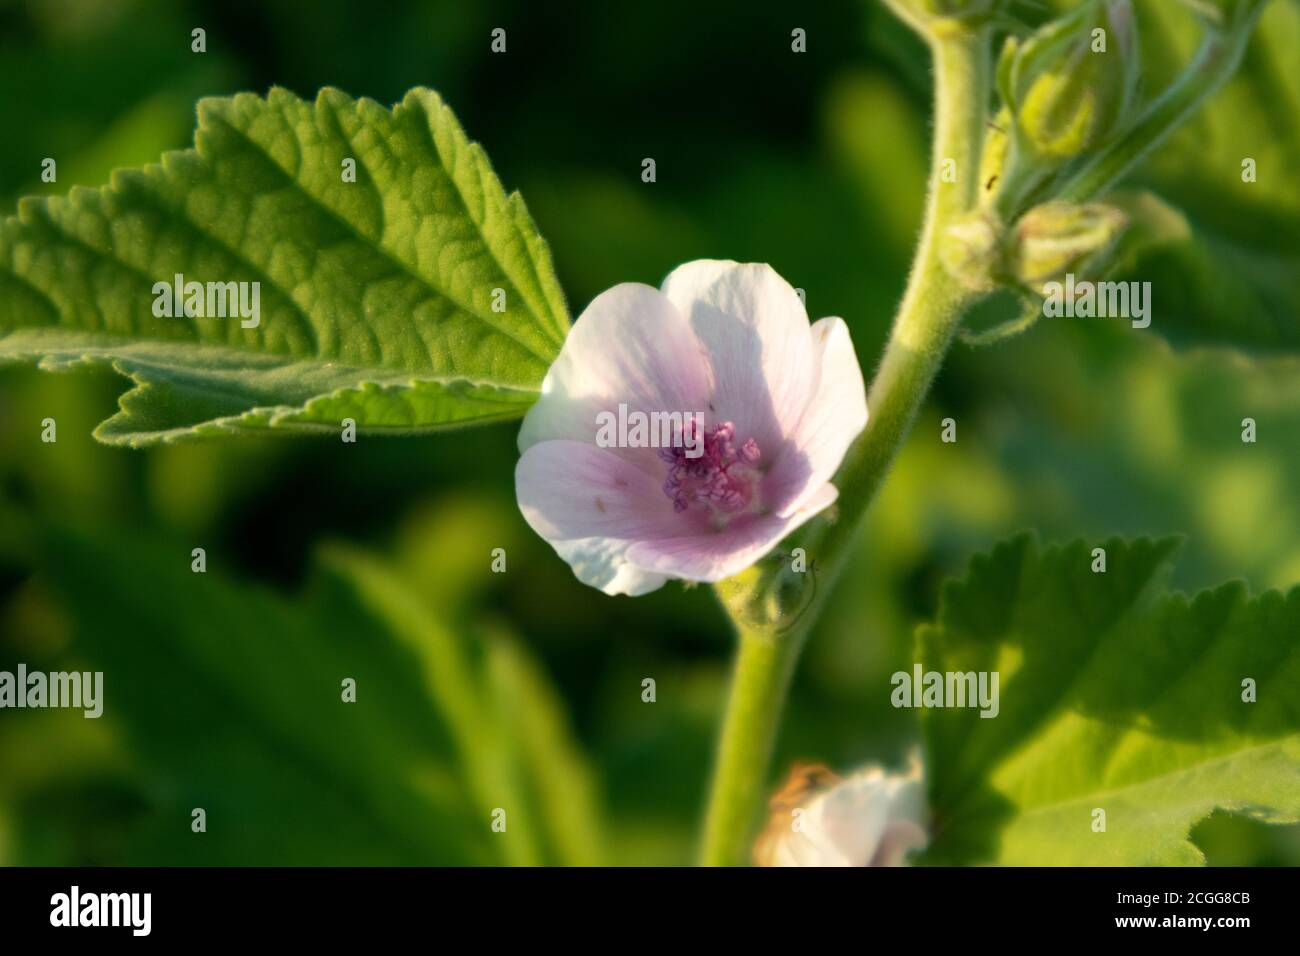 Althaea officinalis, or marsh-mallow, family Malvaceae. Light pink tender blooming flower with leaves in vibrant dark greenery background Stock Photo